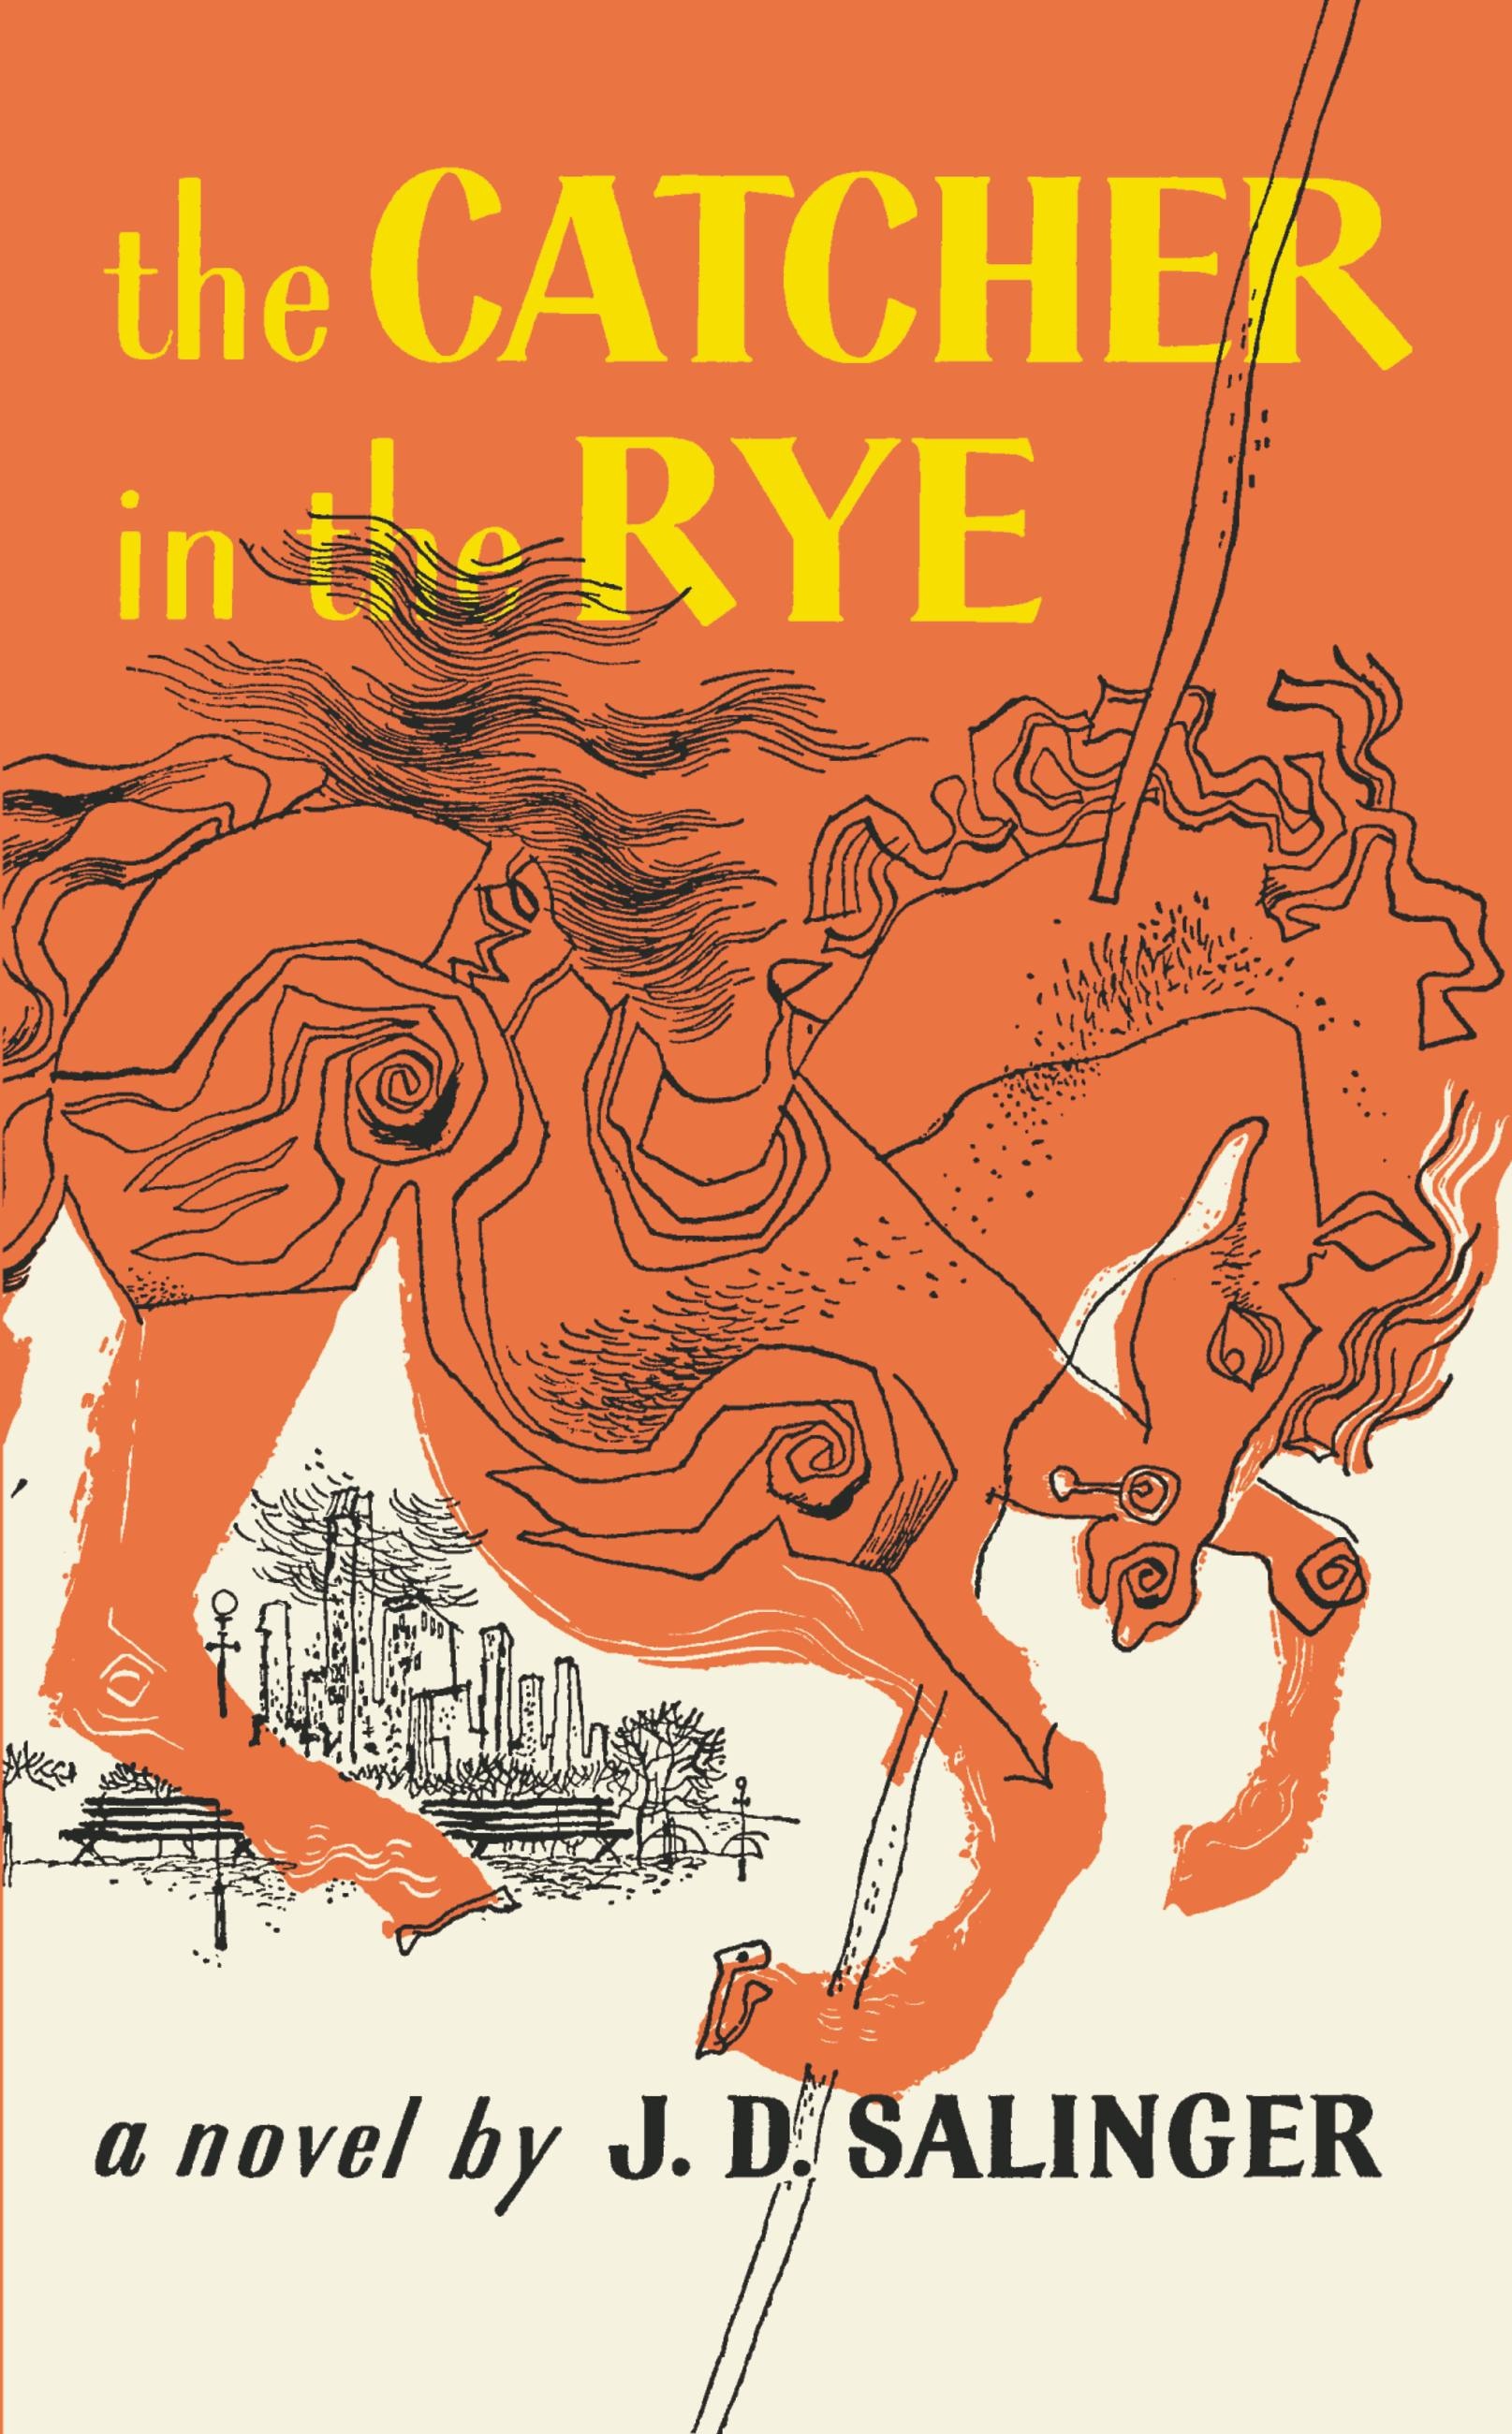 Book Review: The Catcher in the Rye – The Maroon